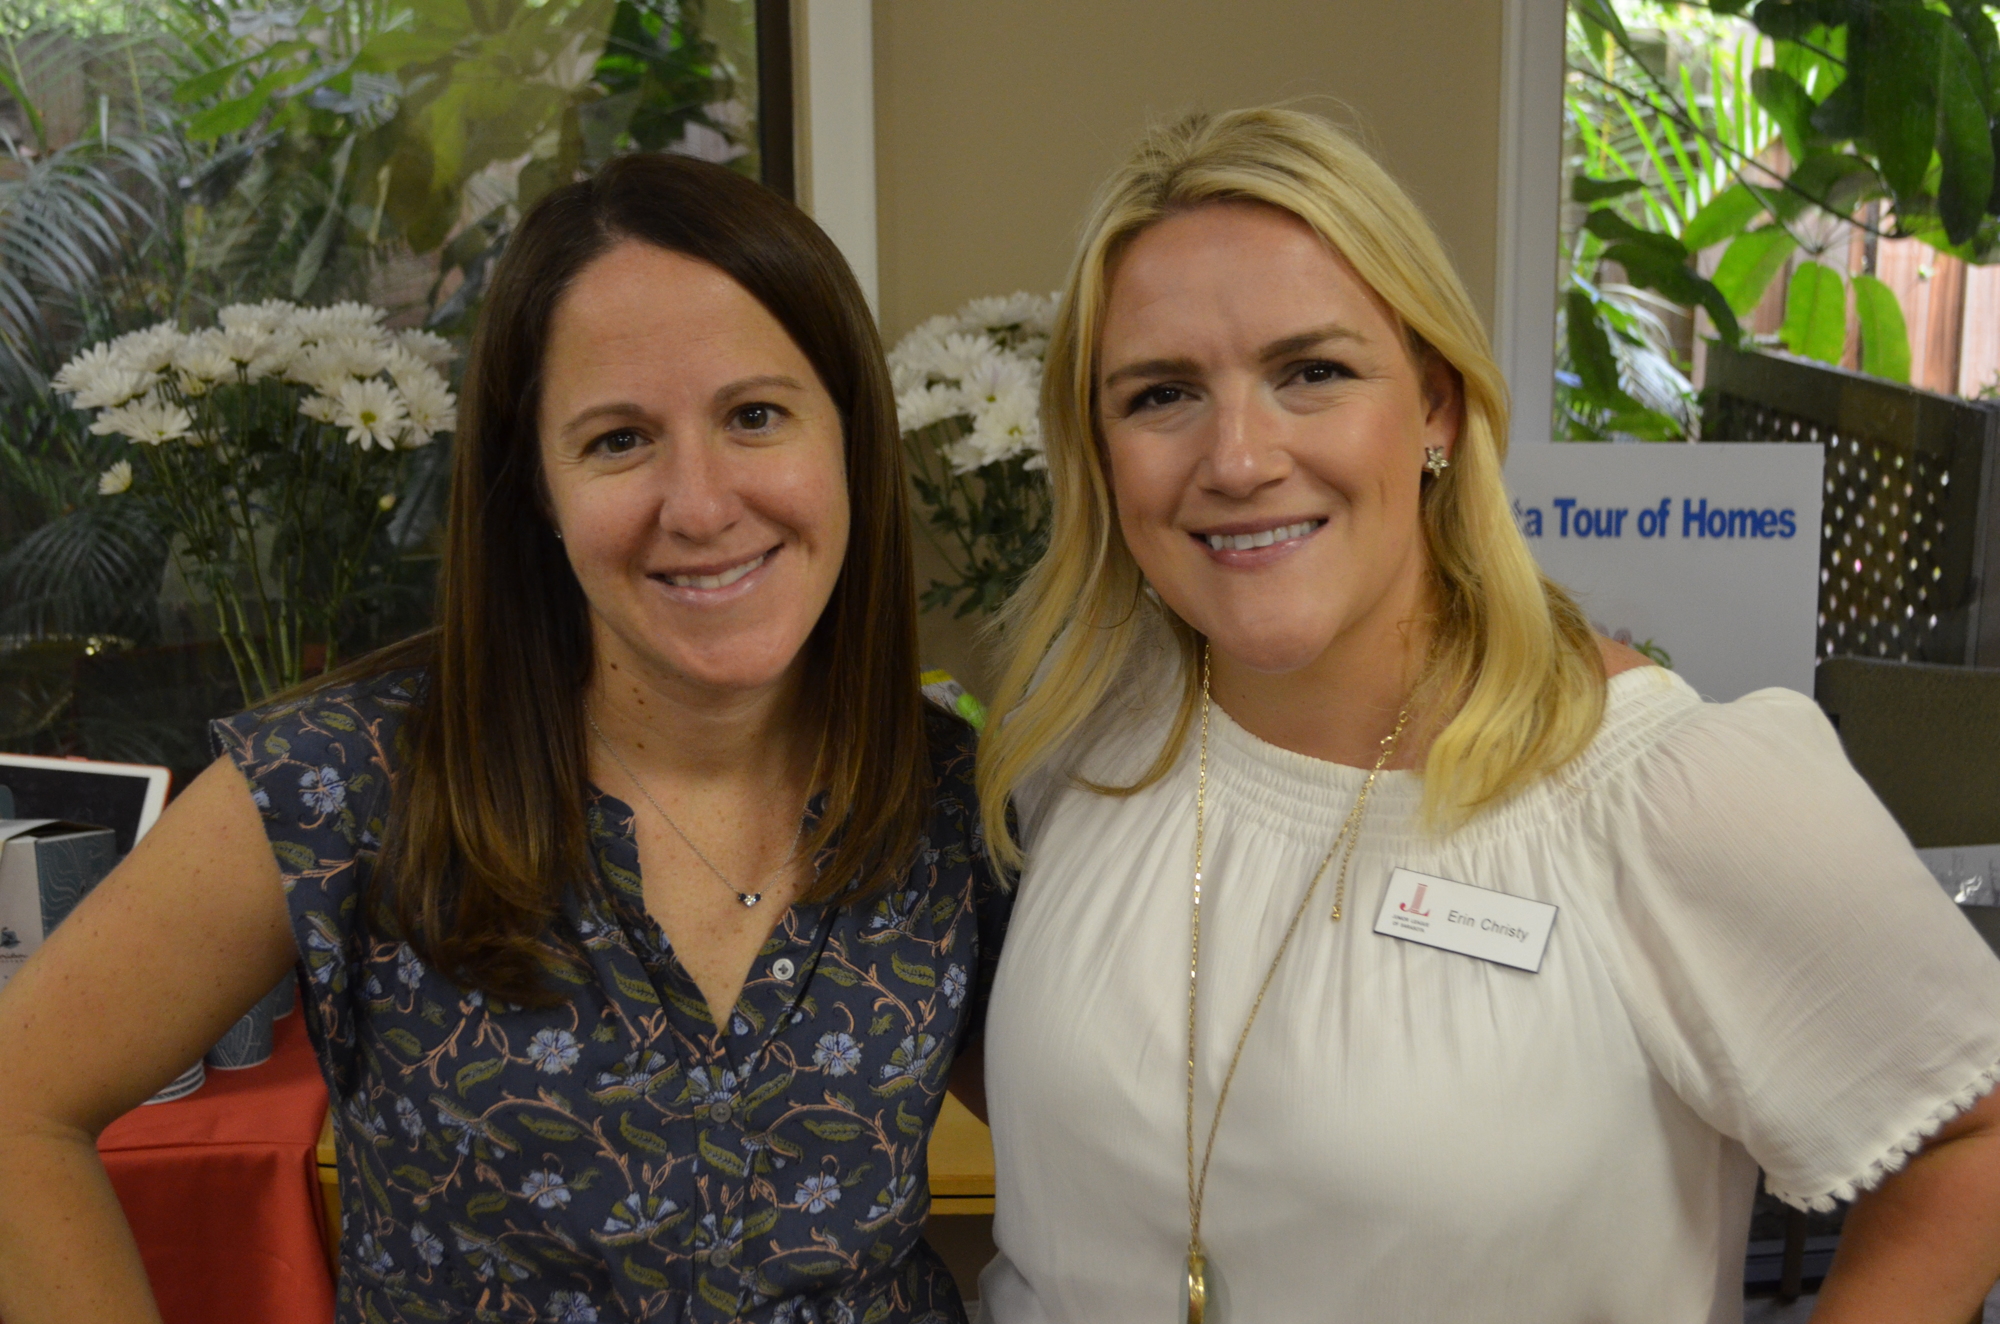 Event Organizer Shannon Hankin and Erin Christy were all smiles at the Junior League of Sarasota July Meet & Greet on Saturday, July 9.